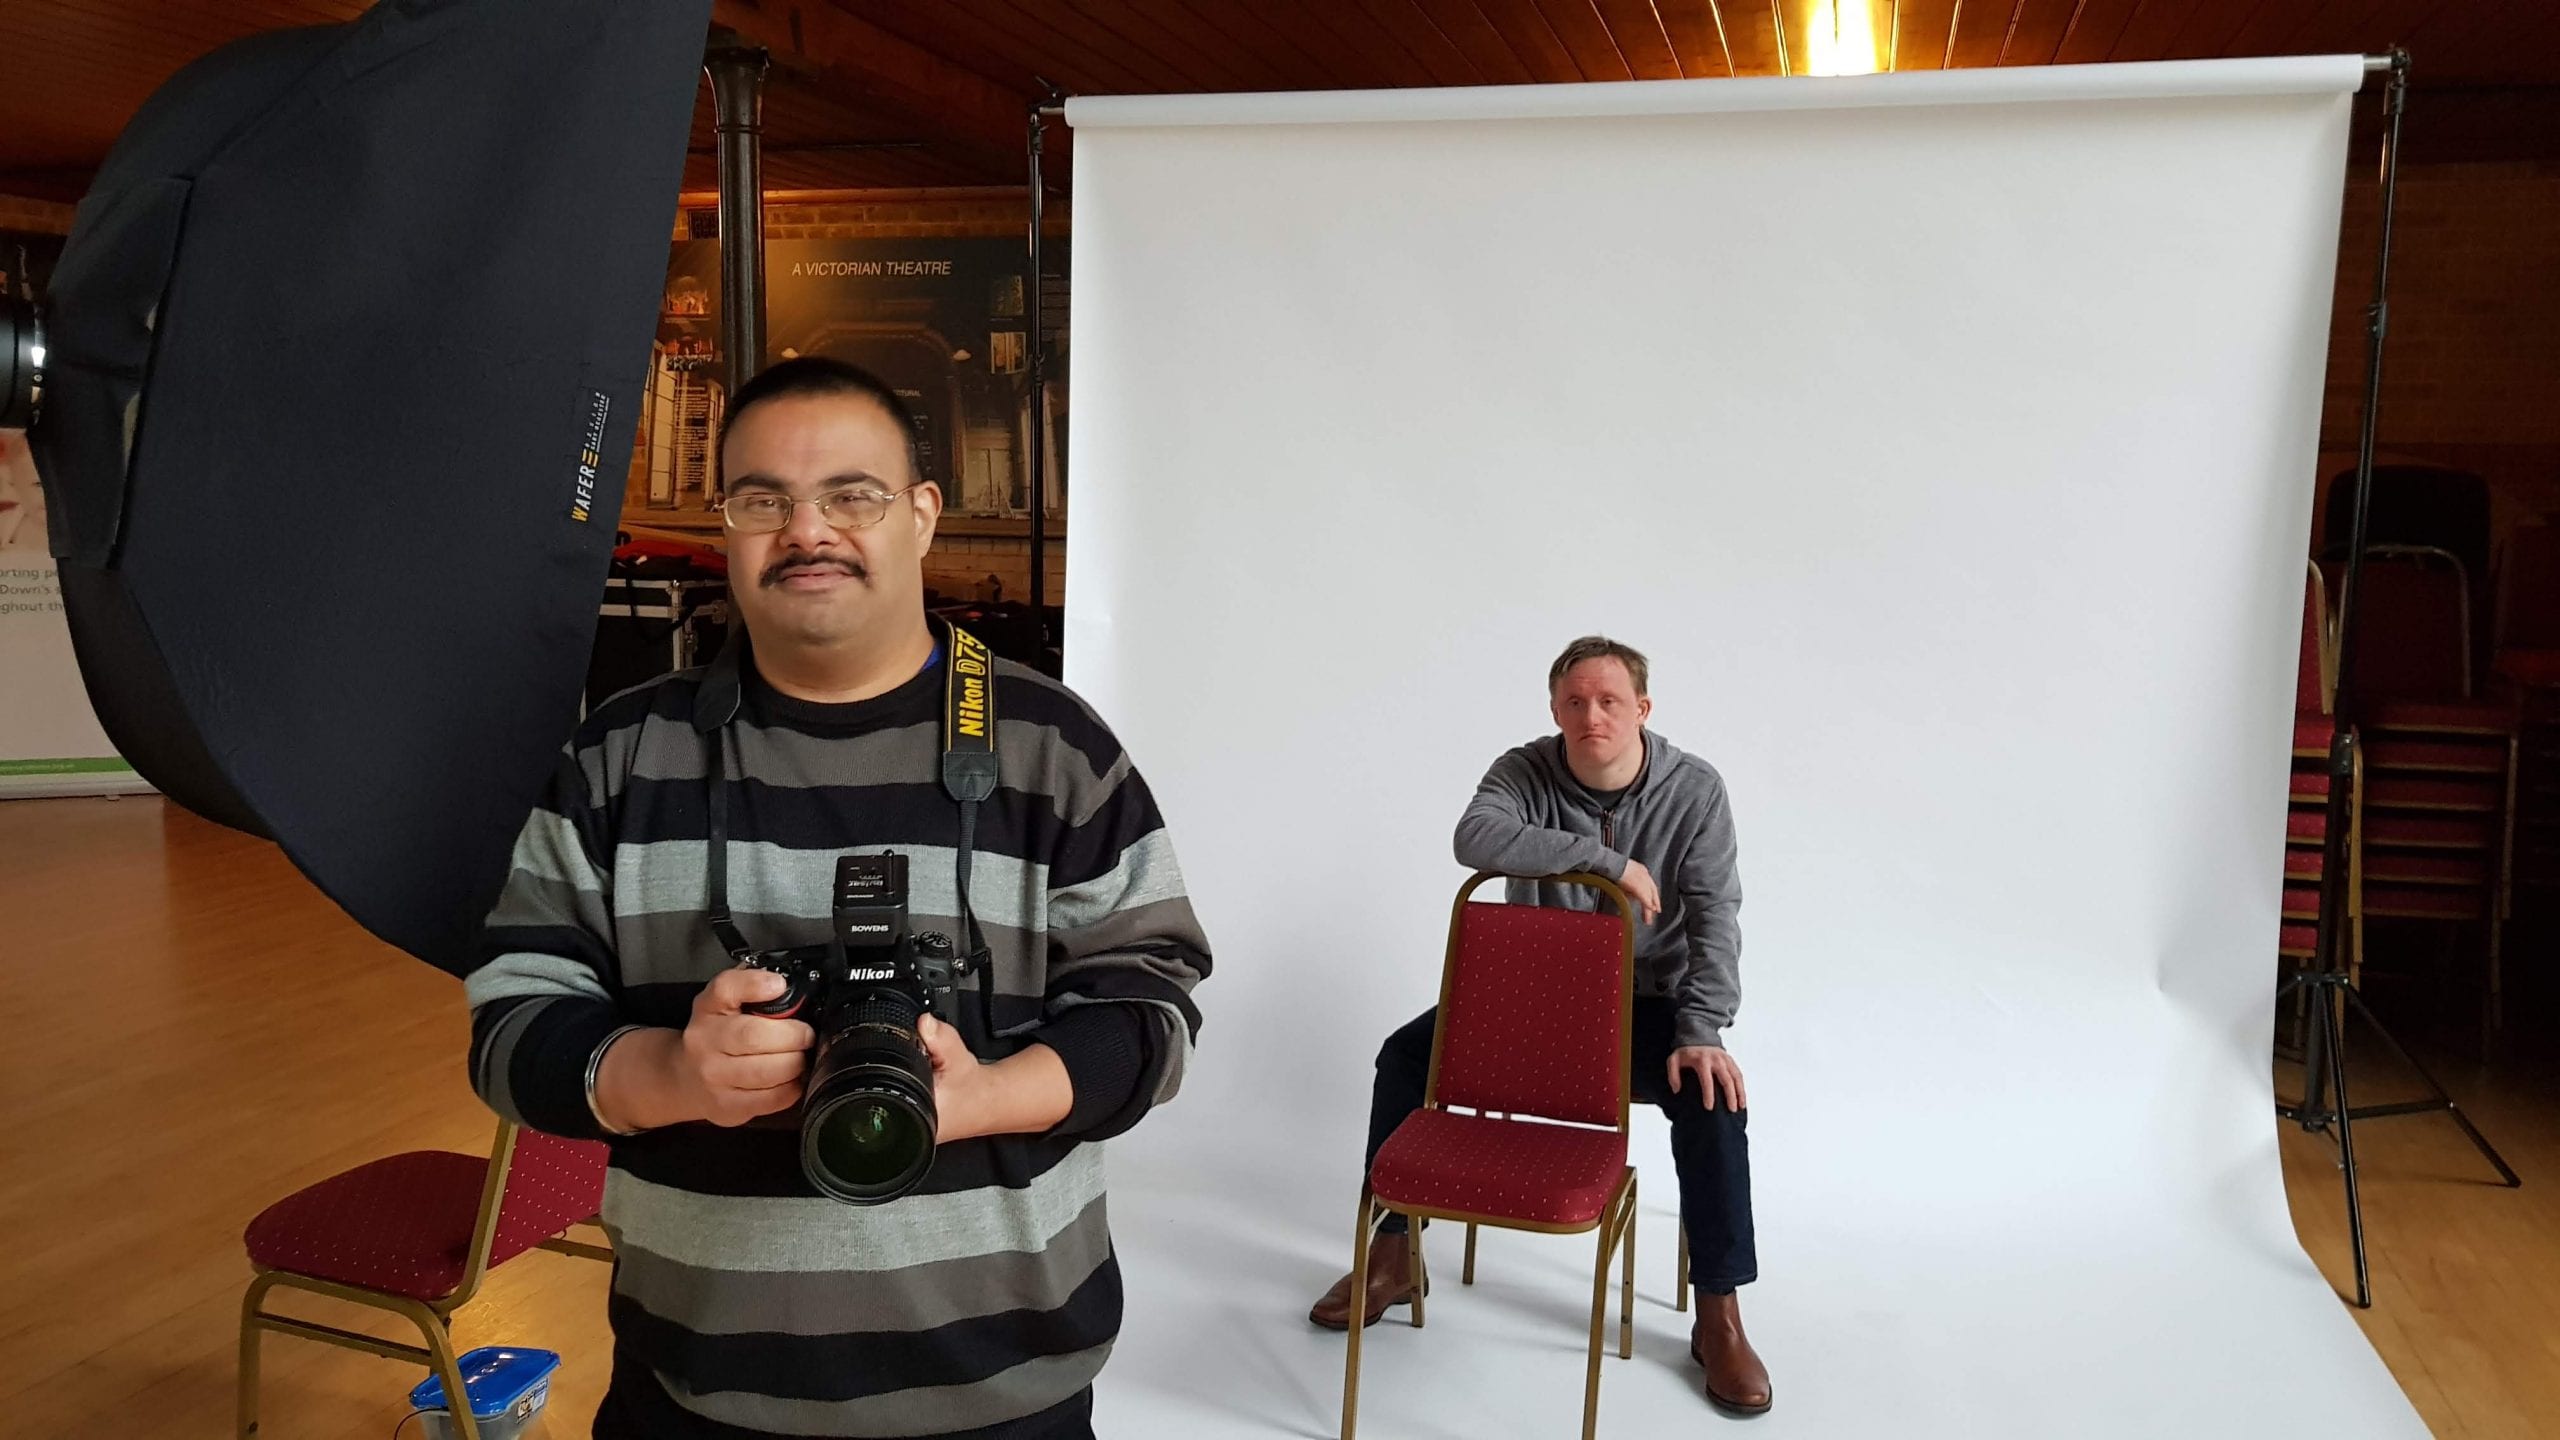 A man who has Down's syndrome poses to be photographed. He sits on a chair in front of a white backdrop. The photographer faces the cameraman also has Down's syndrome